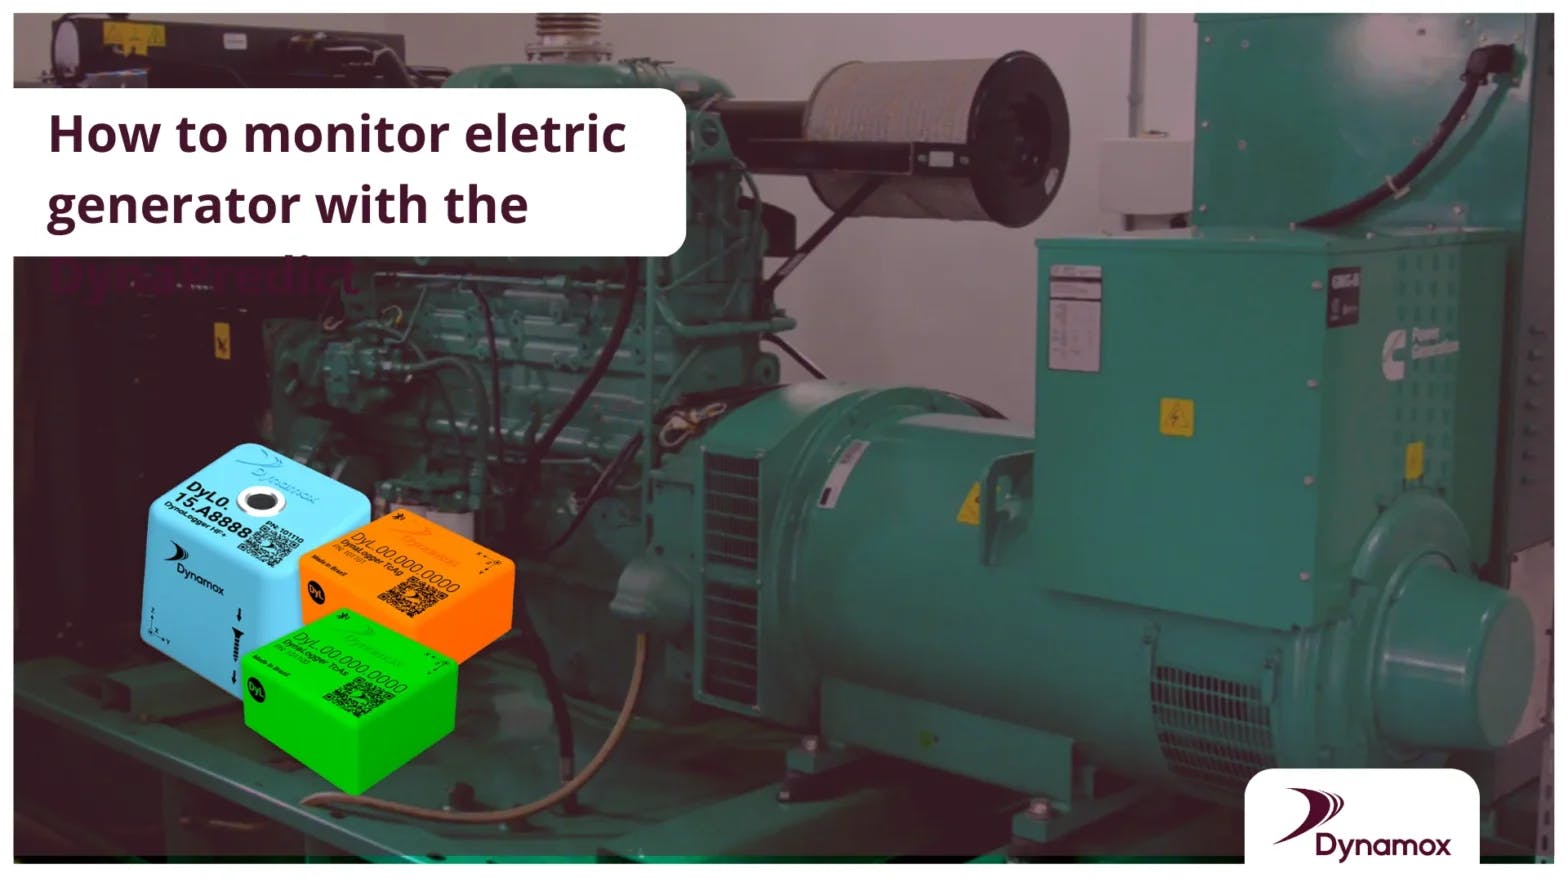 How to monitor eletric generator with the DynaPredict 